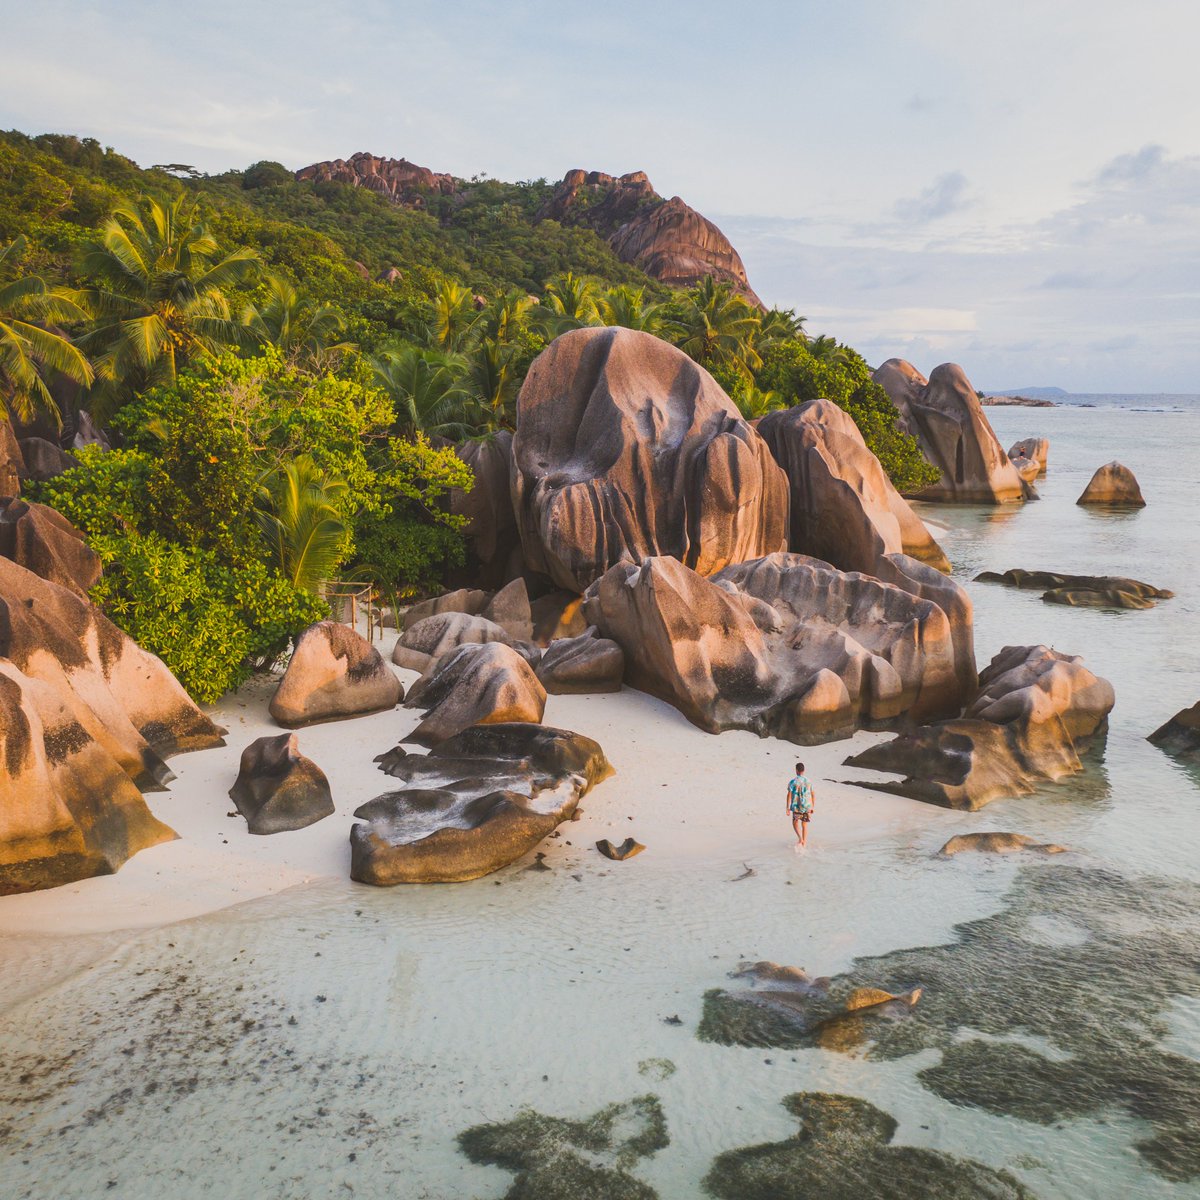 La Digue Island is the ultimate #tropical paradise for all the #beachlovers out there!

#travel #vacations #beaches #traveling